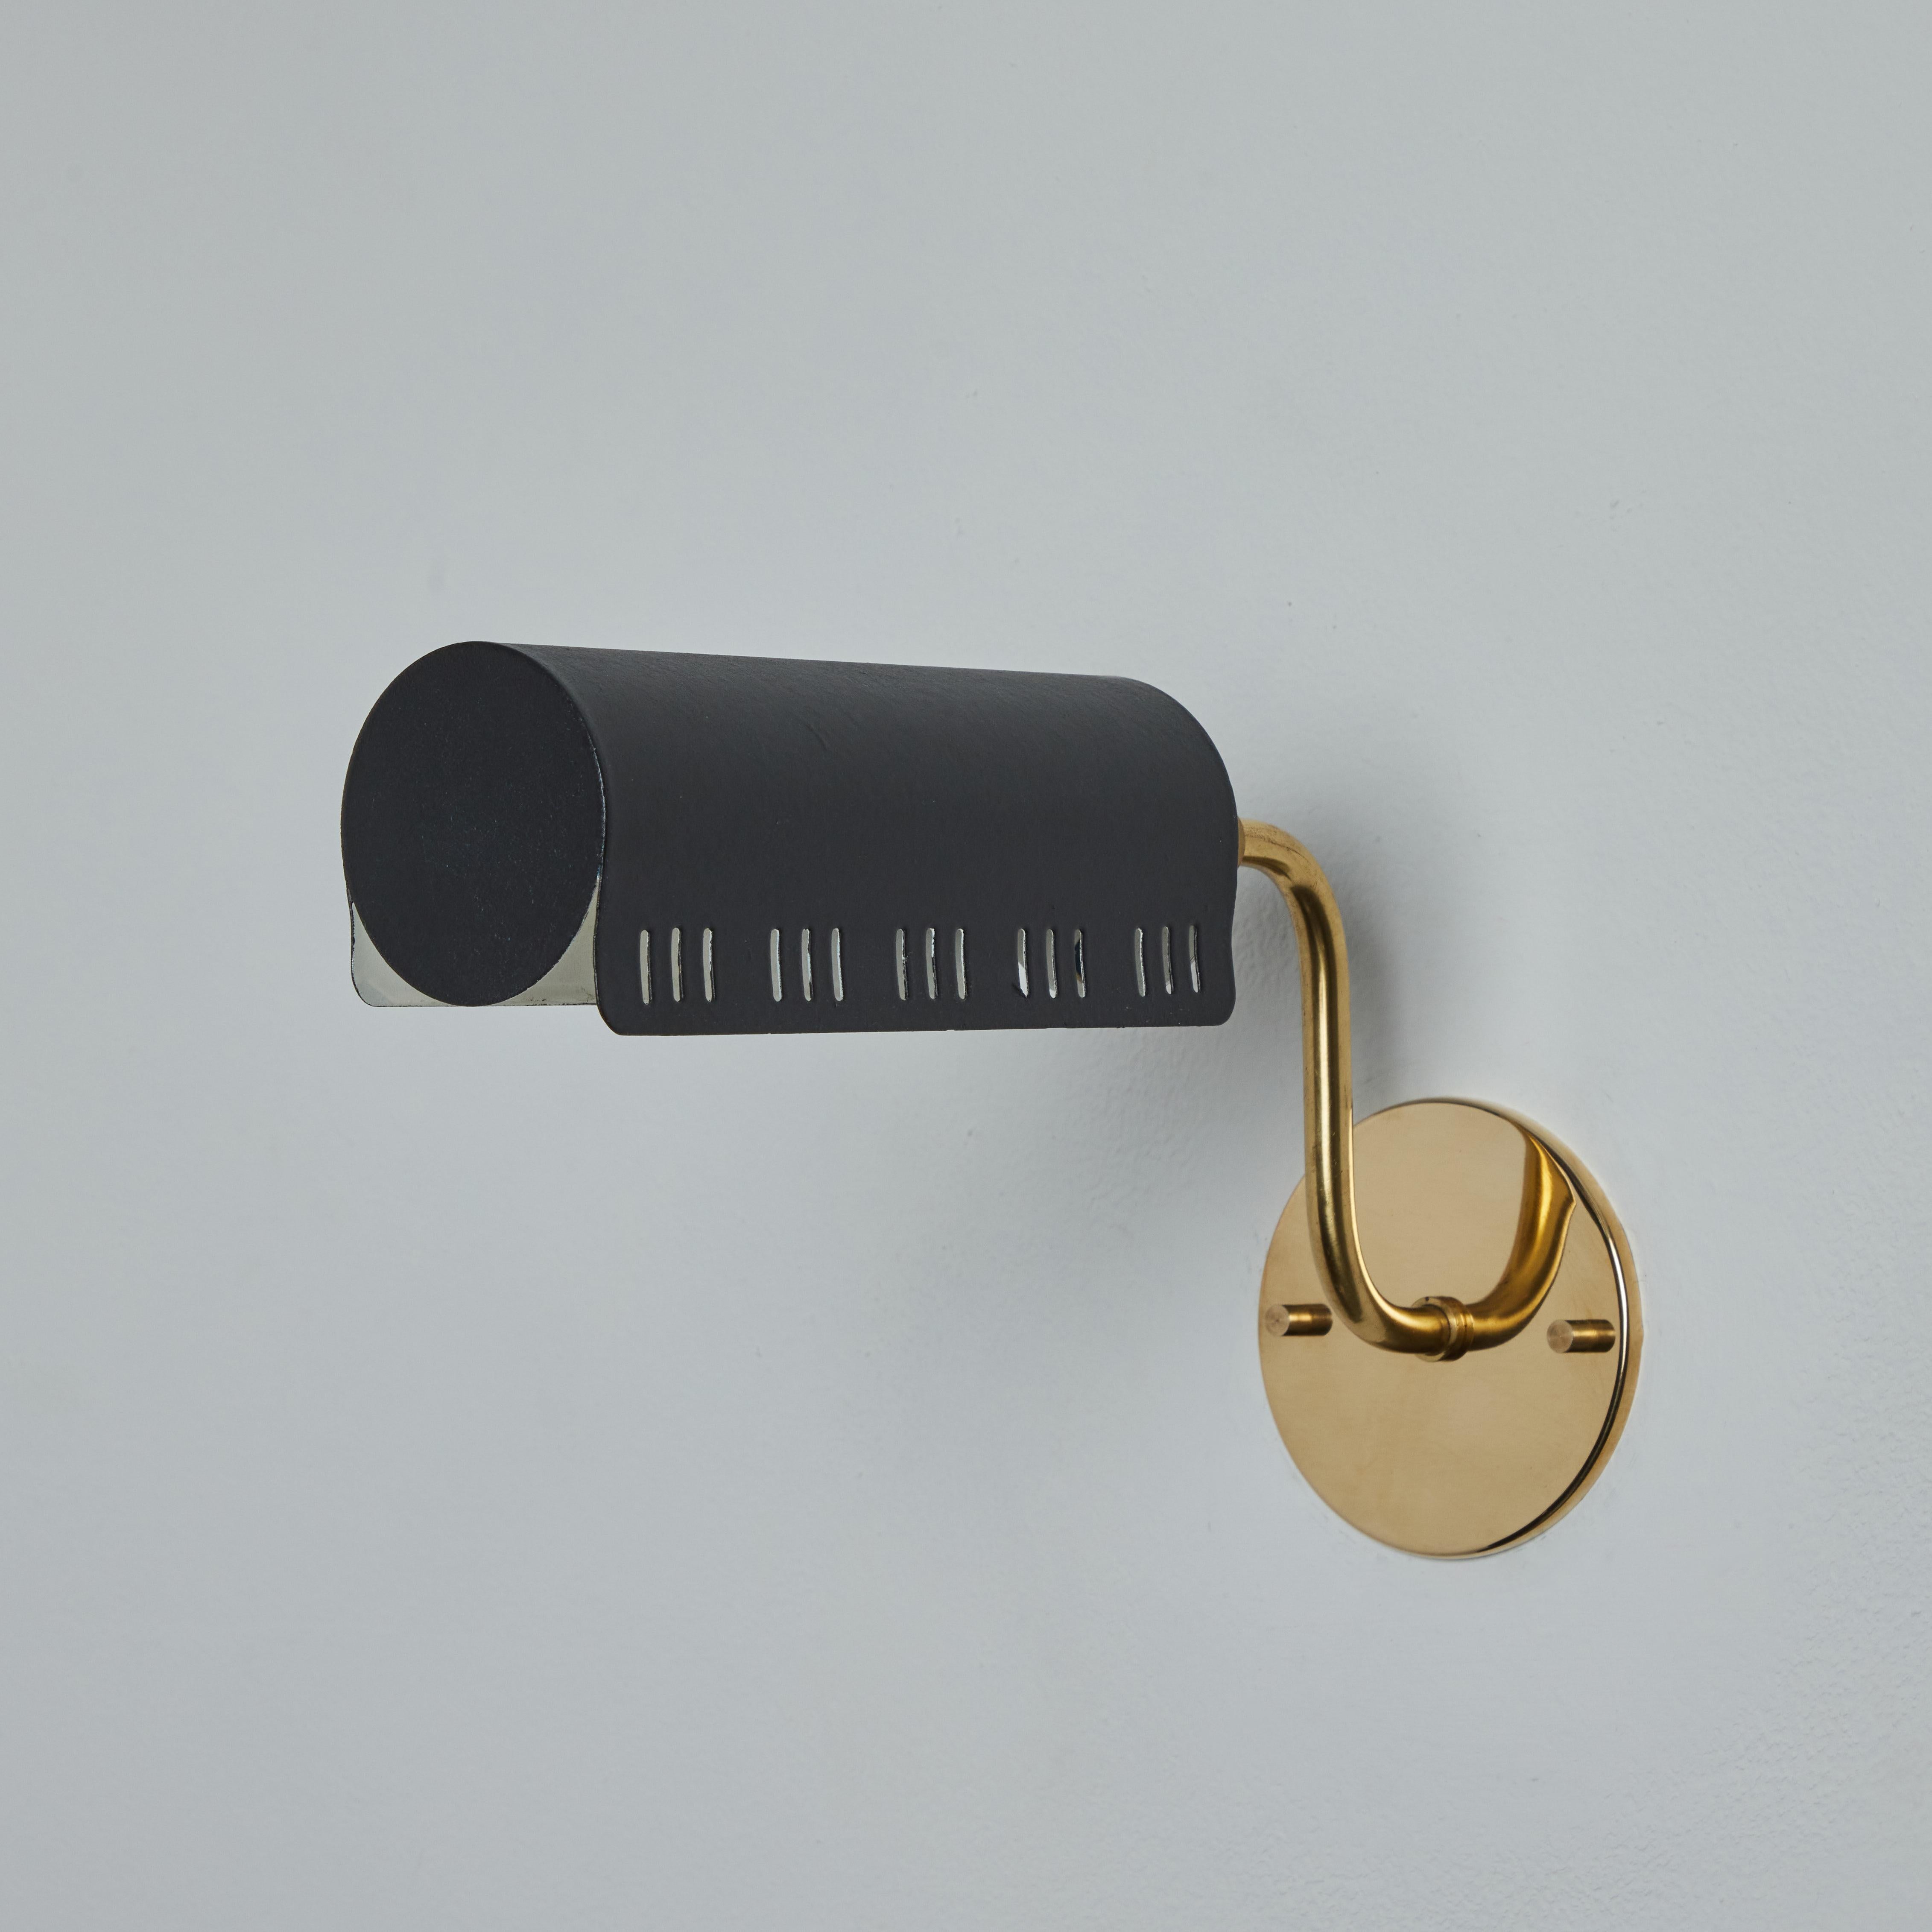 1960s Model #8260 Black Metal and Brass Wall Lamp for Falkenbergs Belysning.

Executed in black painted perforated metal shade with brass hardware, this highly adjustable wall light swivels freely to cast either direct or diffuse indirect light.